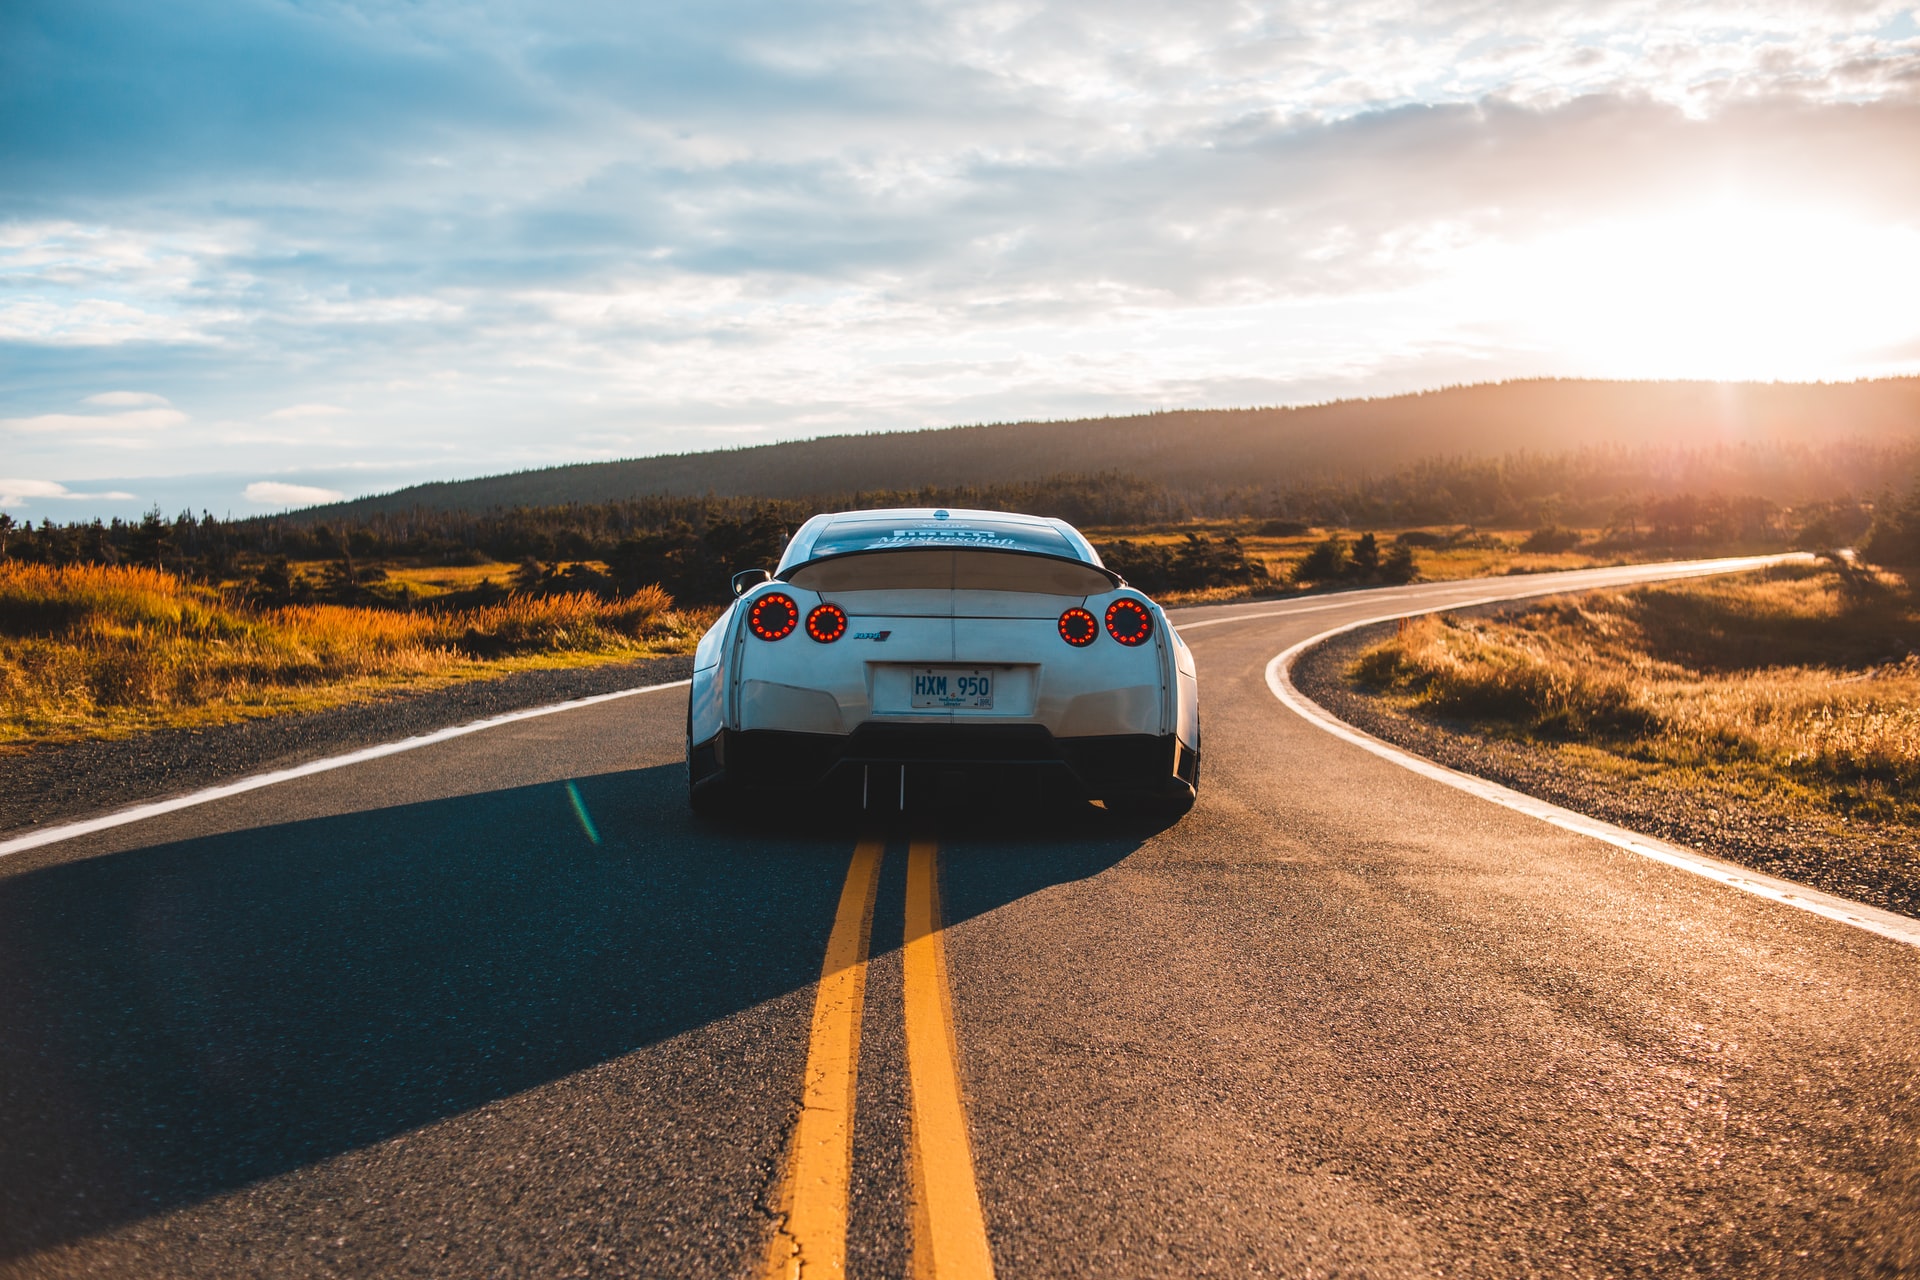 5 Reasons To Start an Automotive Business